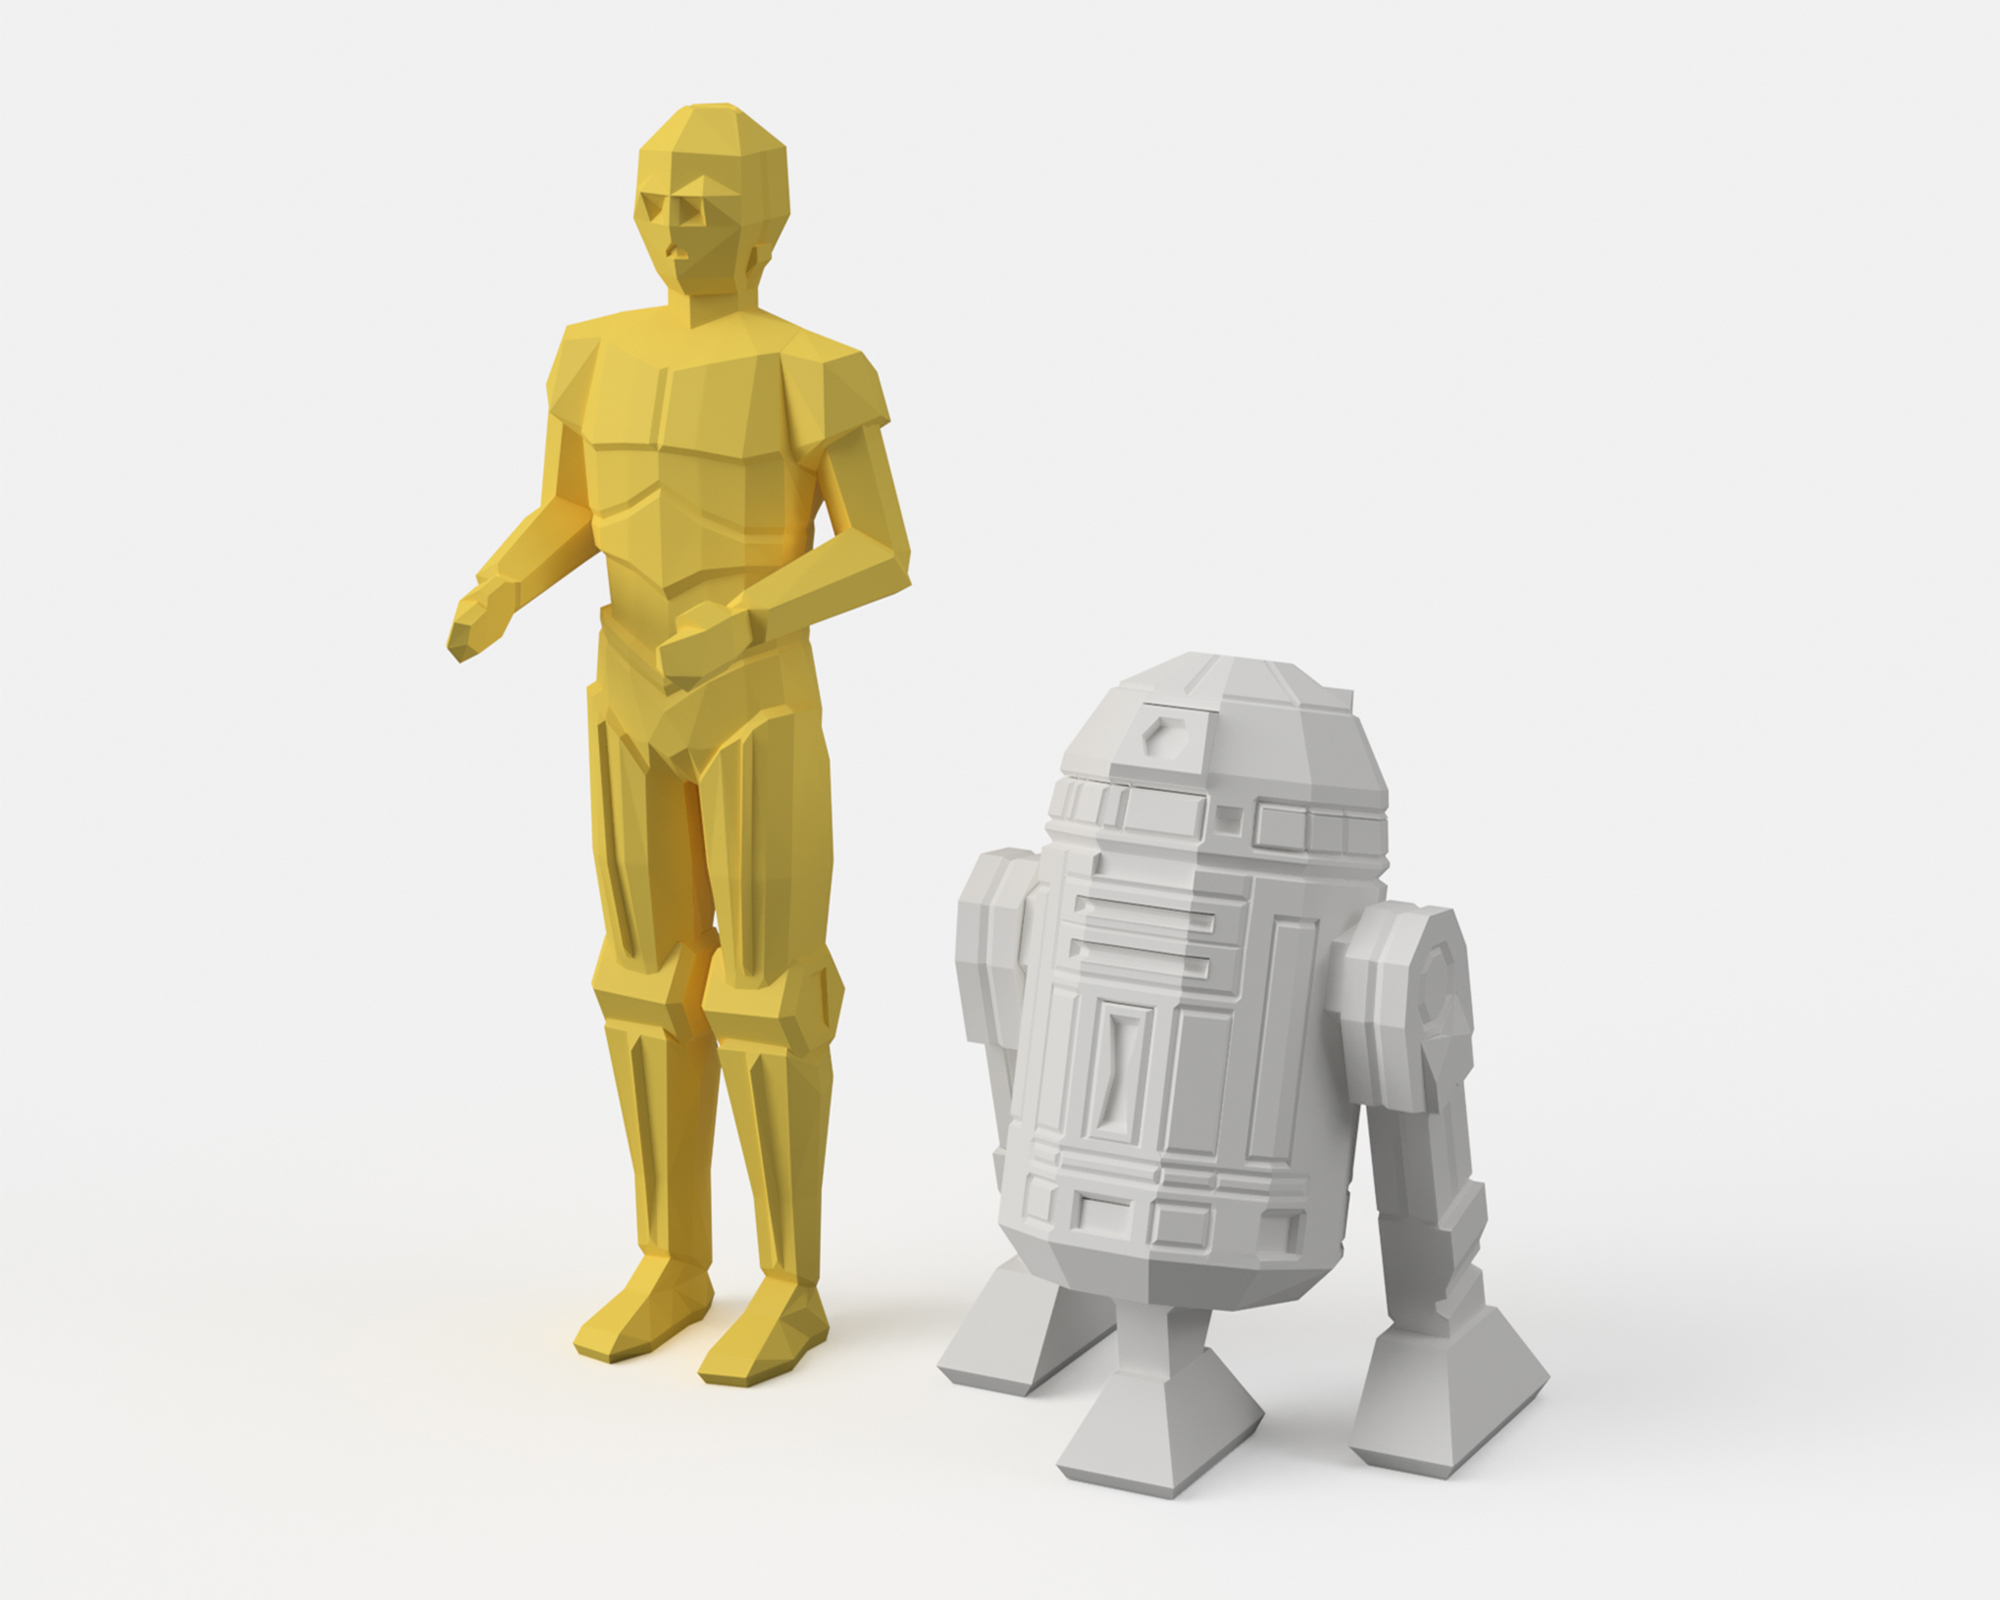 3d Printed Low Poly Toys By Flowalistik Pinshape